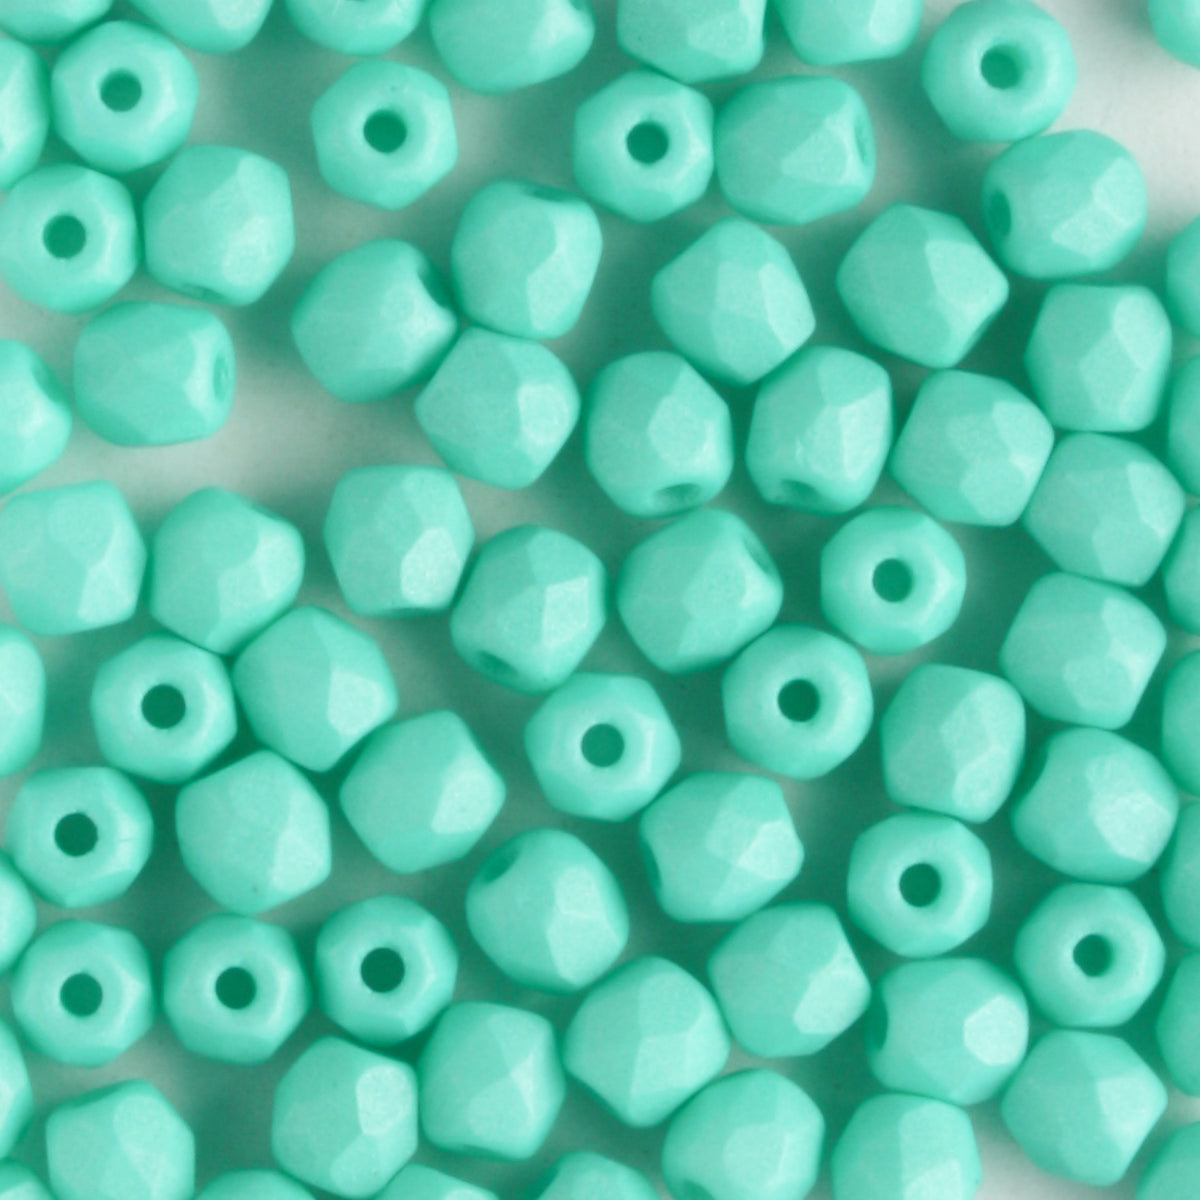 3mm Round Fire Polish Saturated Teal - 100 beads